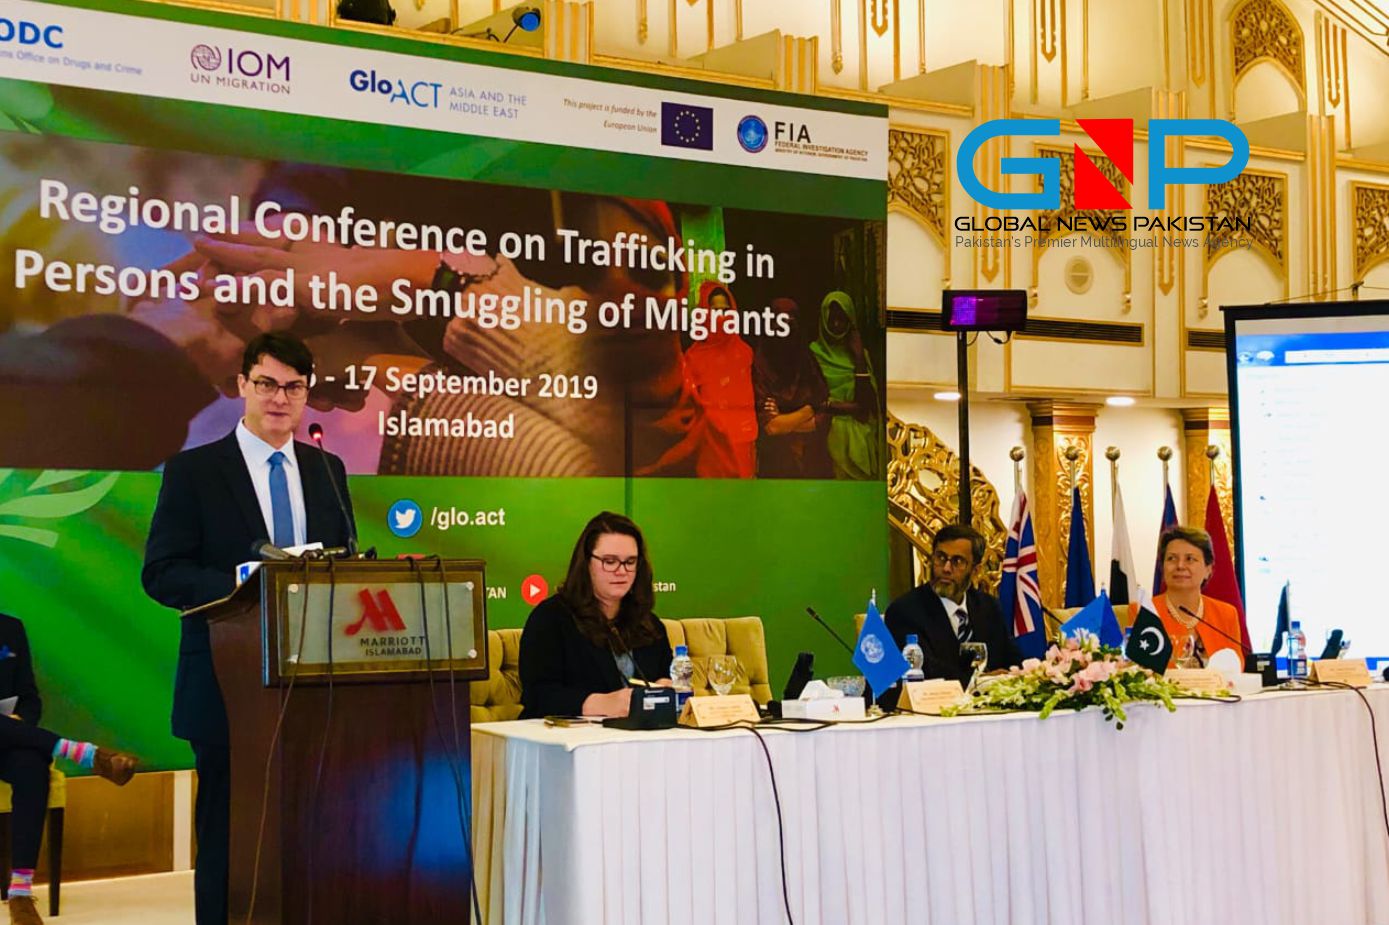 Regional Conference on Trafficking in Persons and Smuggling of Migrants Inaugurated1